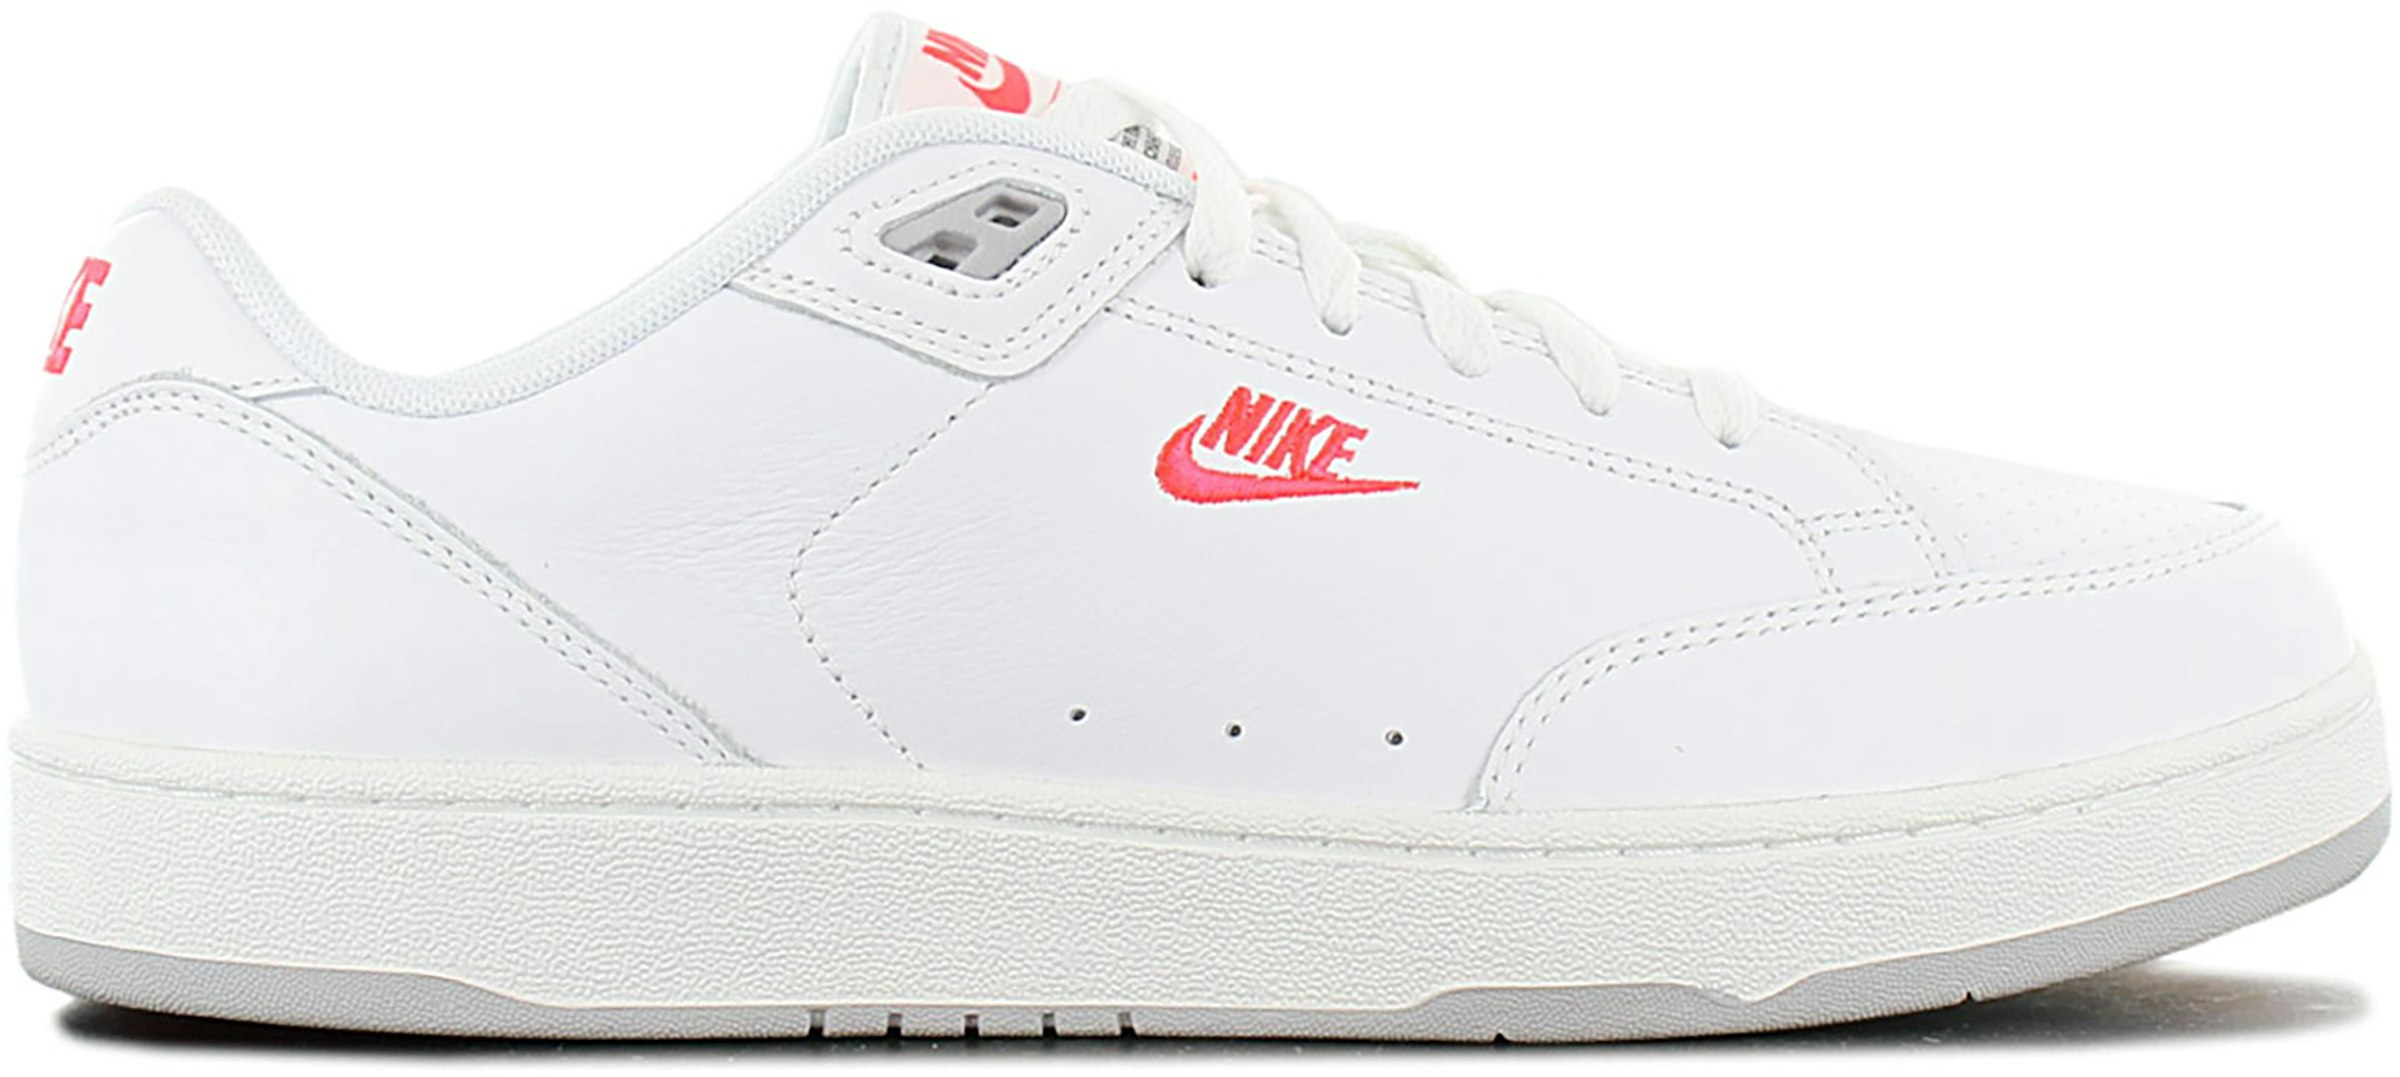 Nike Grandstand 2 White Solar Red Wolf Grey - AA8005-103 MX